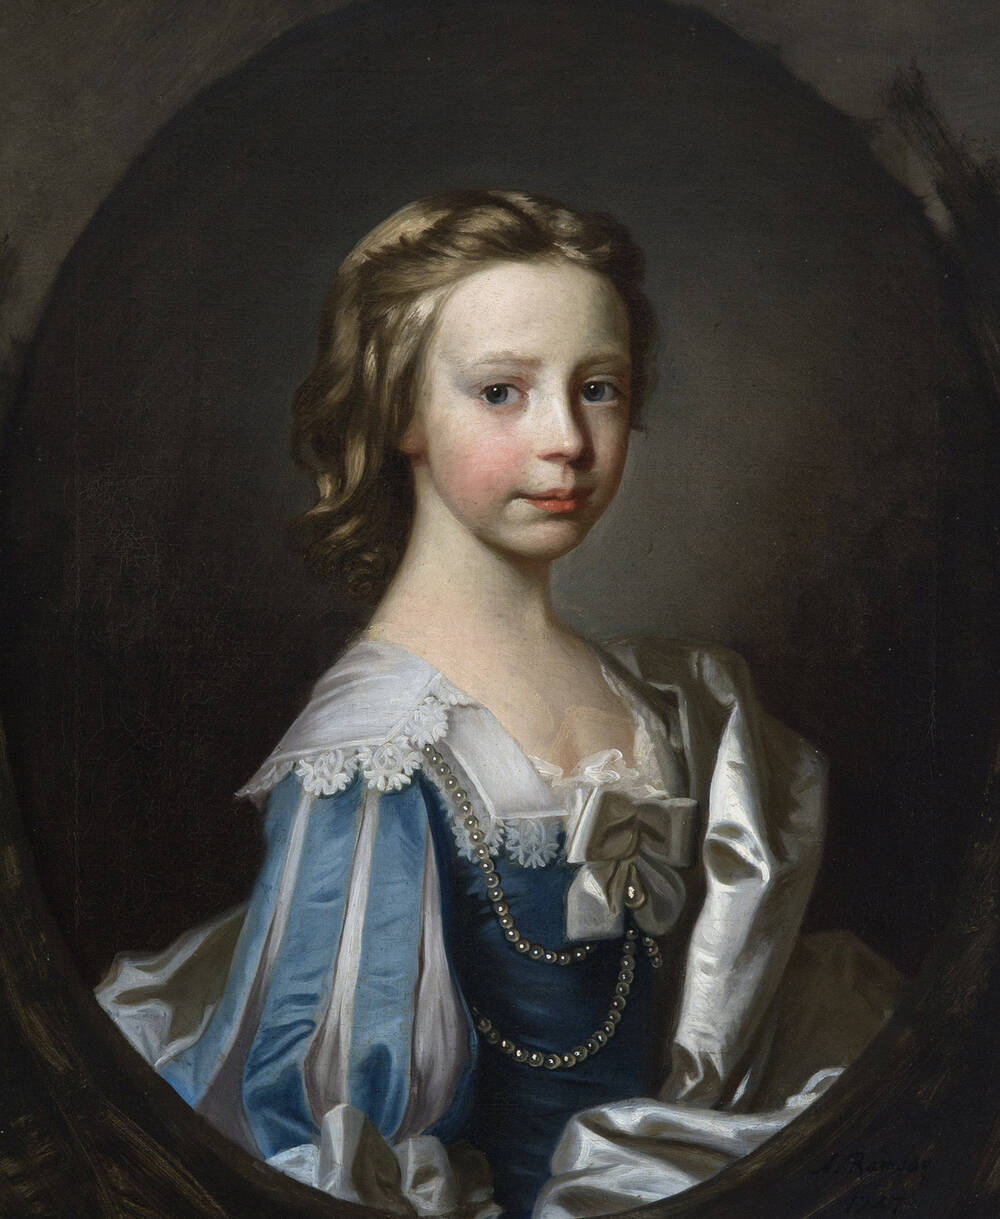 An oval half portrait of a young girl dressed in a formal blue dress, with pearl decoration.